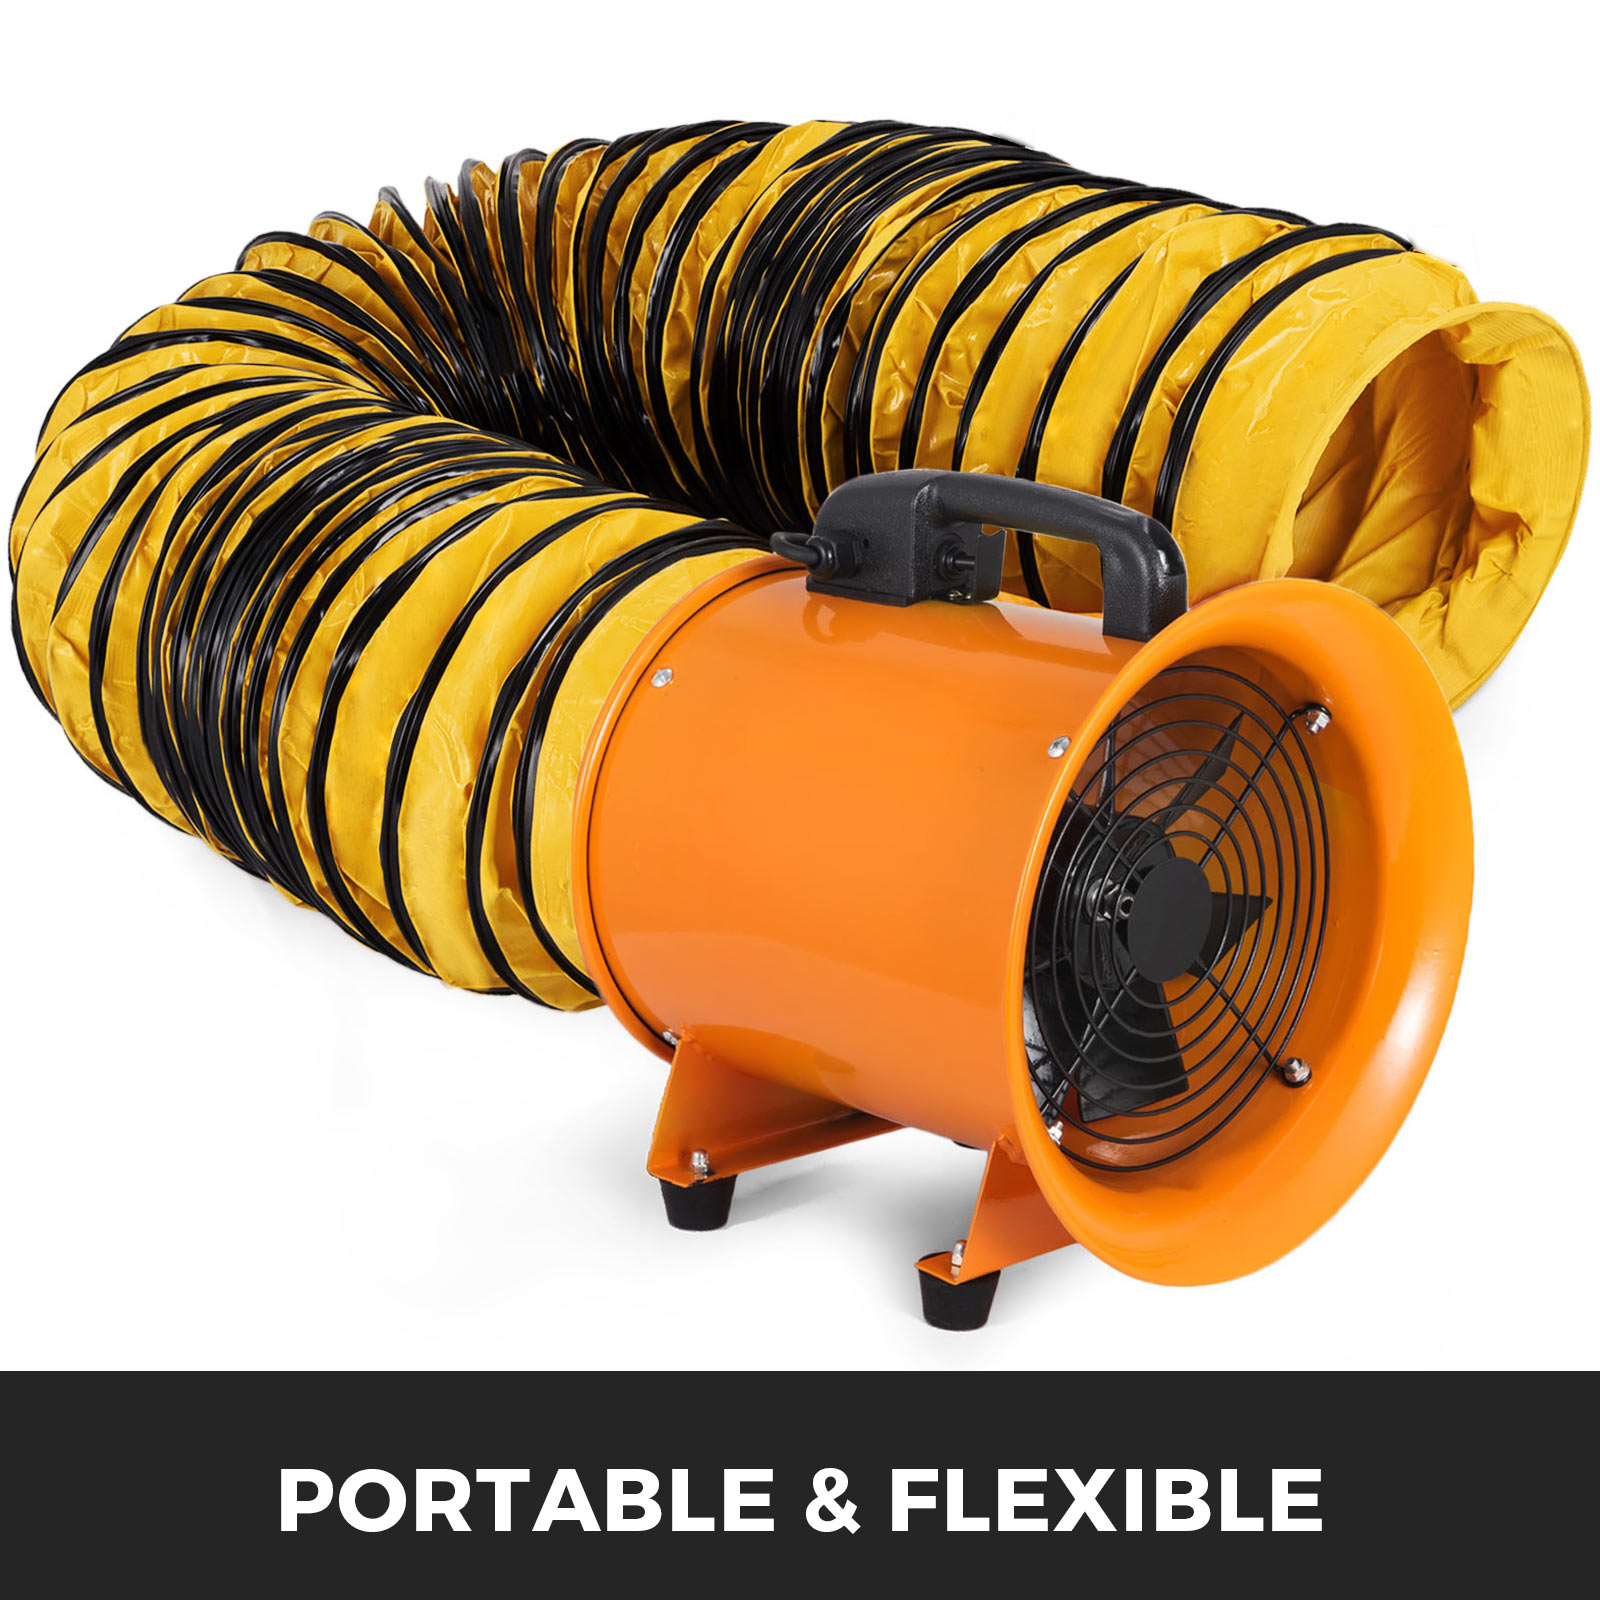 Details about   PVC flexible ducting industrial portable ventilator extractor hose heavy duty 